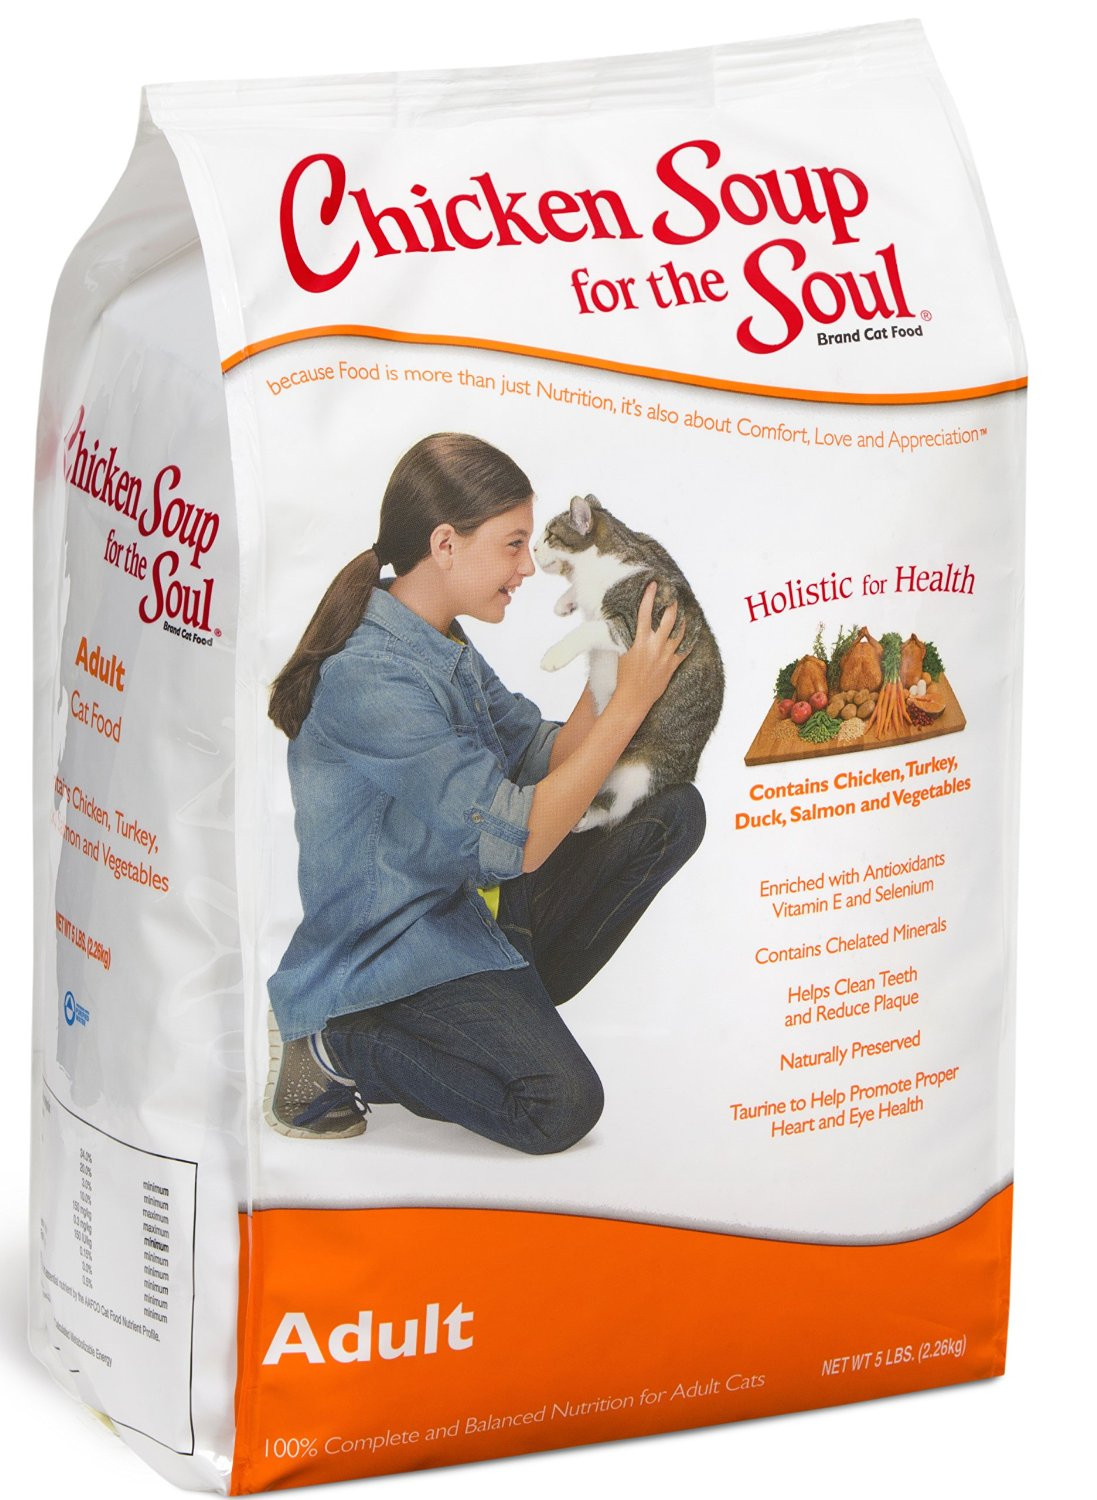 Chicken Soup Cat Food
 Chicken Soup for The Soul Cat Food Full Review